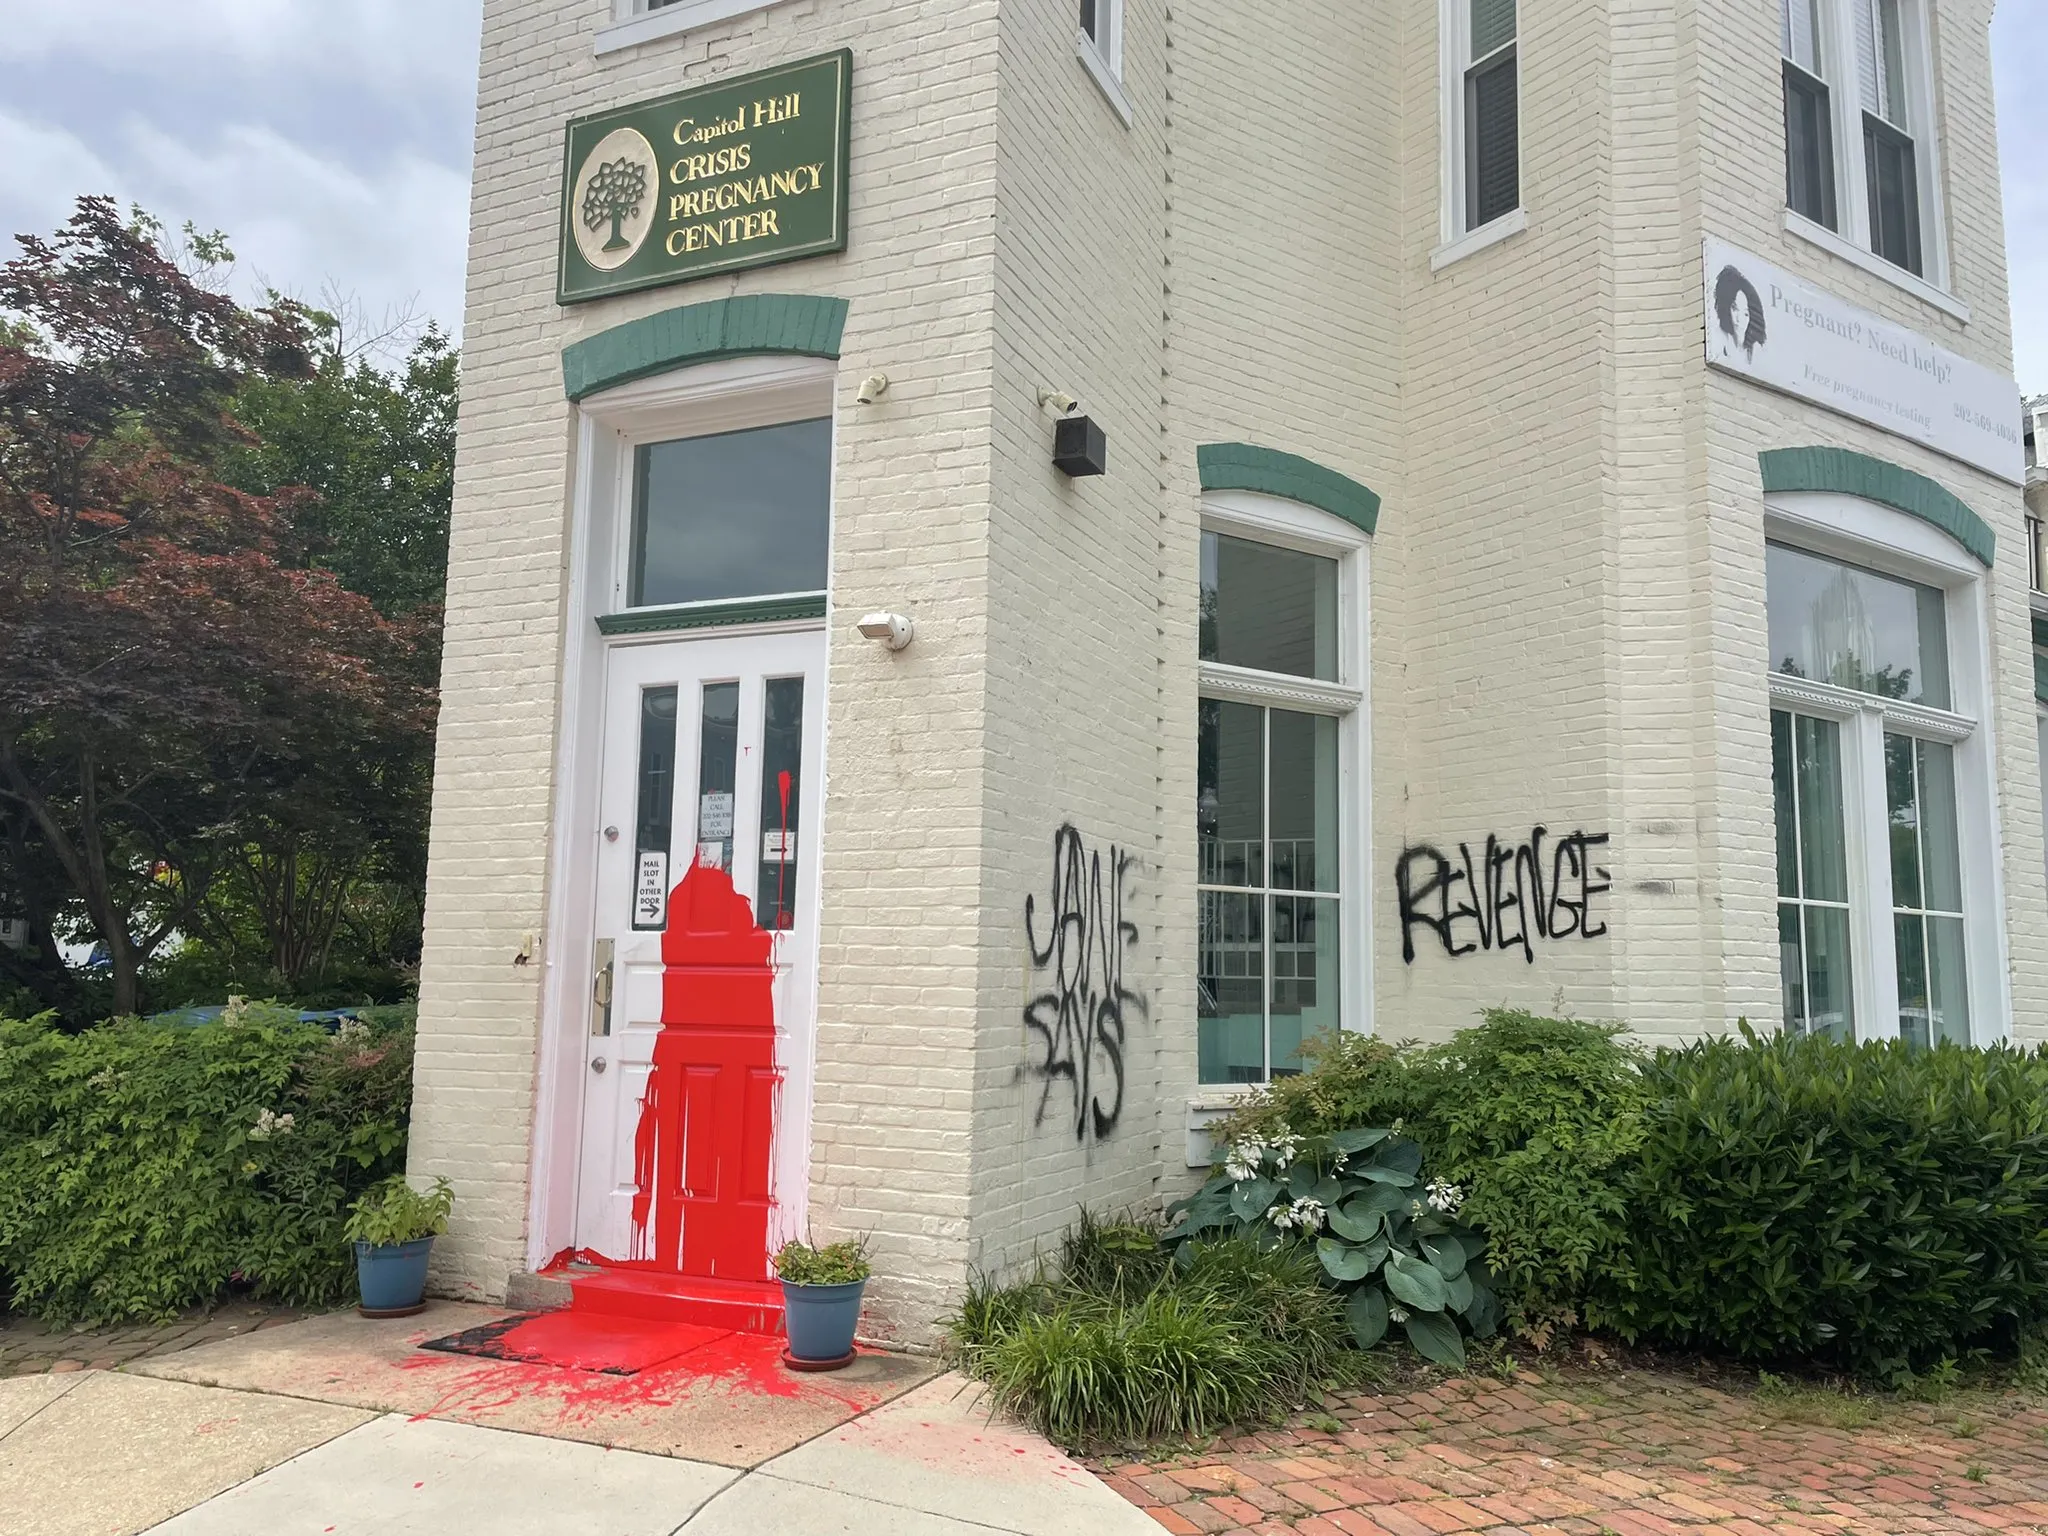 Photos of the June 3 vandalism show a splash of red paint covering the Capitol Hill Pregnancy Center’s white door. On the brick outer building, the words “Jane says revenge” are written in black spray paint.?w=200&h=150